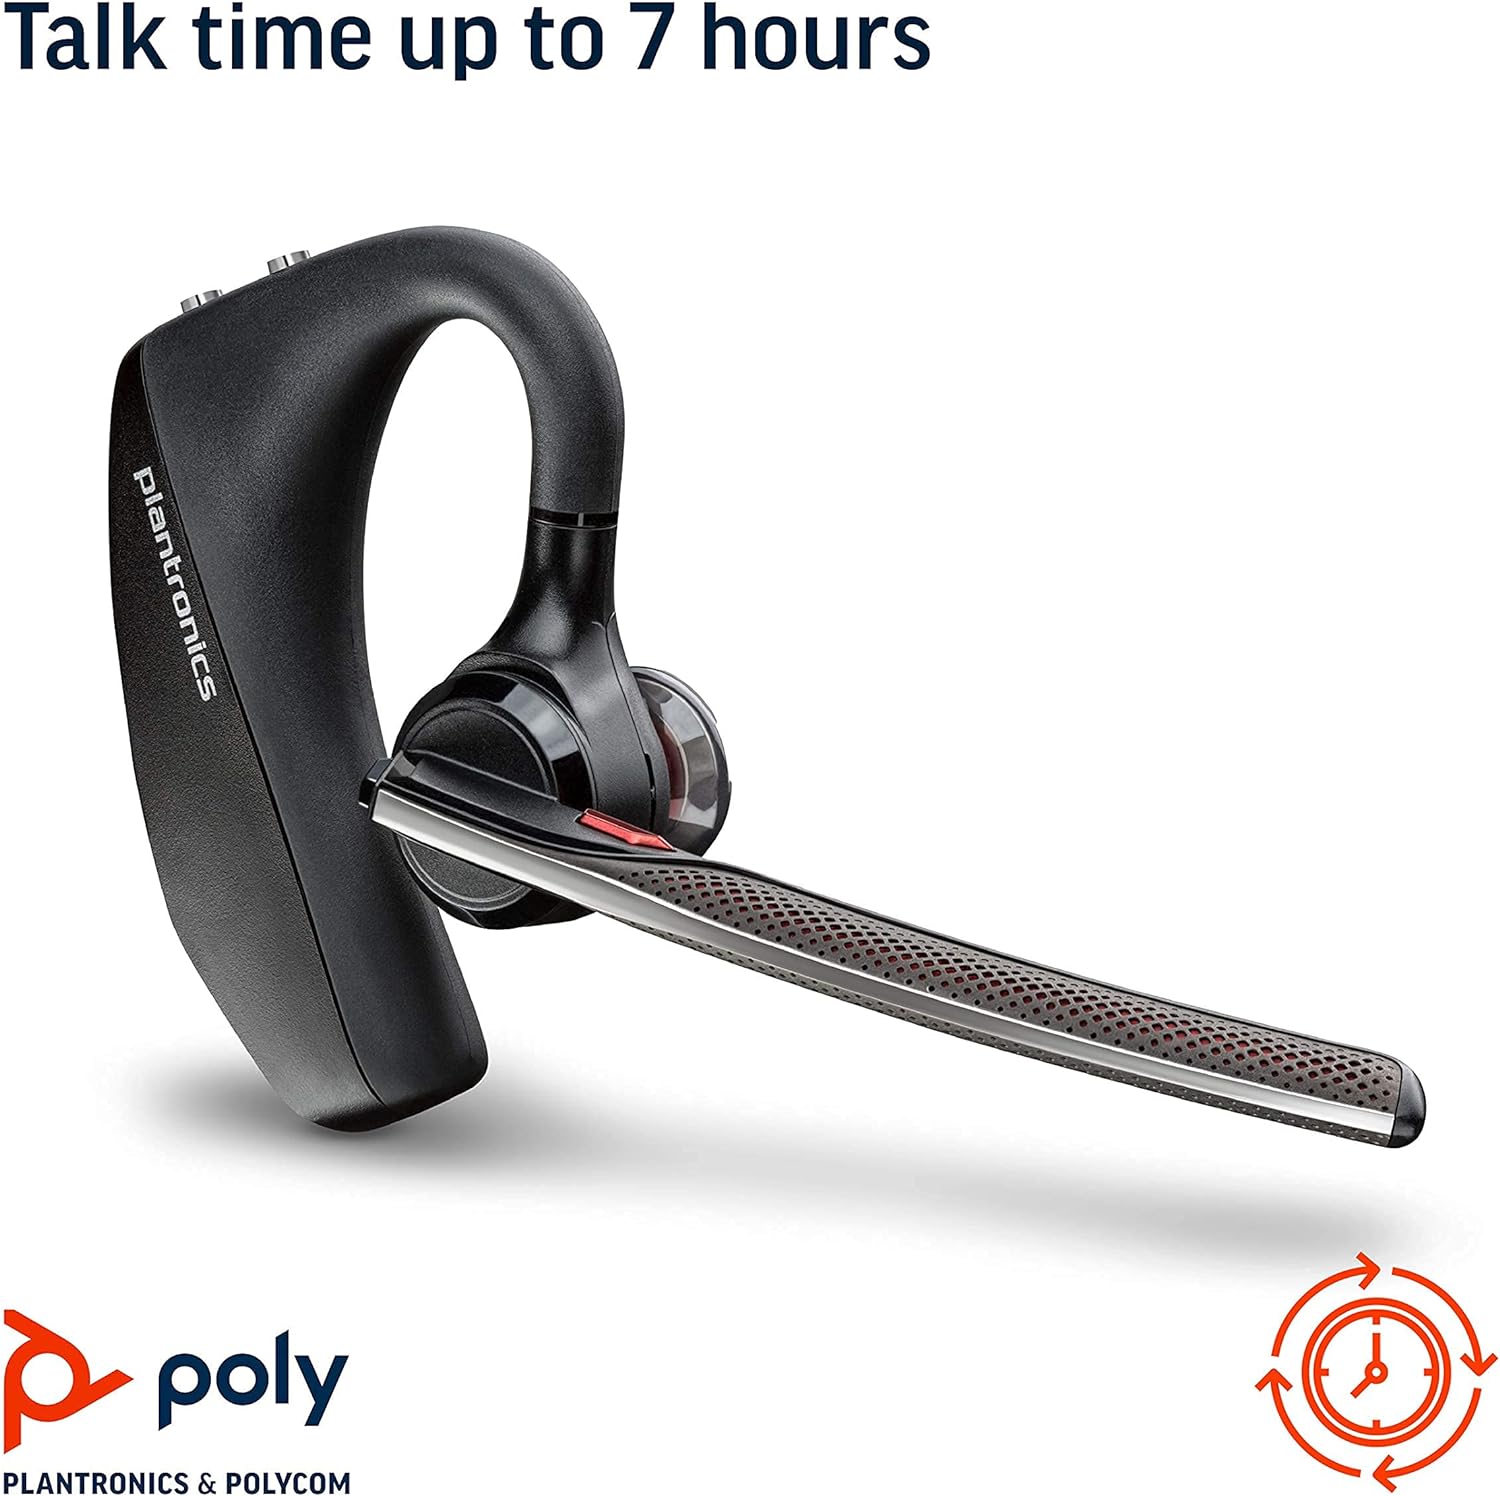 Plantronics - Voyager 5200 UC (Poly) - Bluetooth Single-Ear (Monaural) Headset - USB-A Compatible to connect to your PC and\/or Mac - Works with Teams, Zoom & more - Noise Canceling